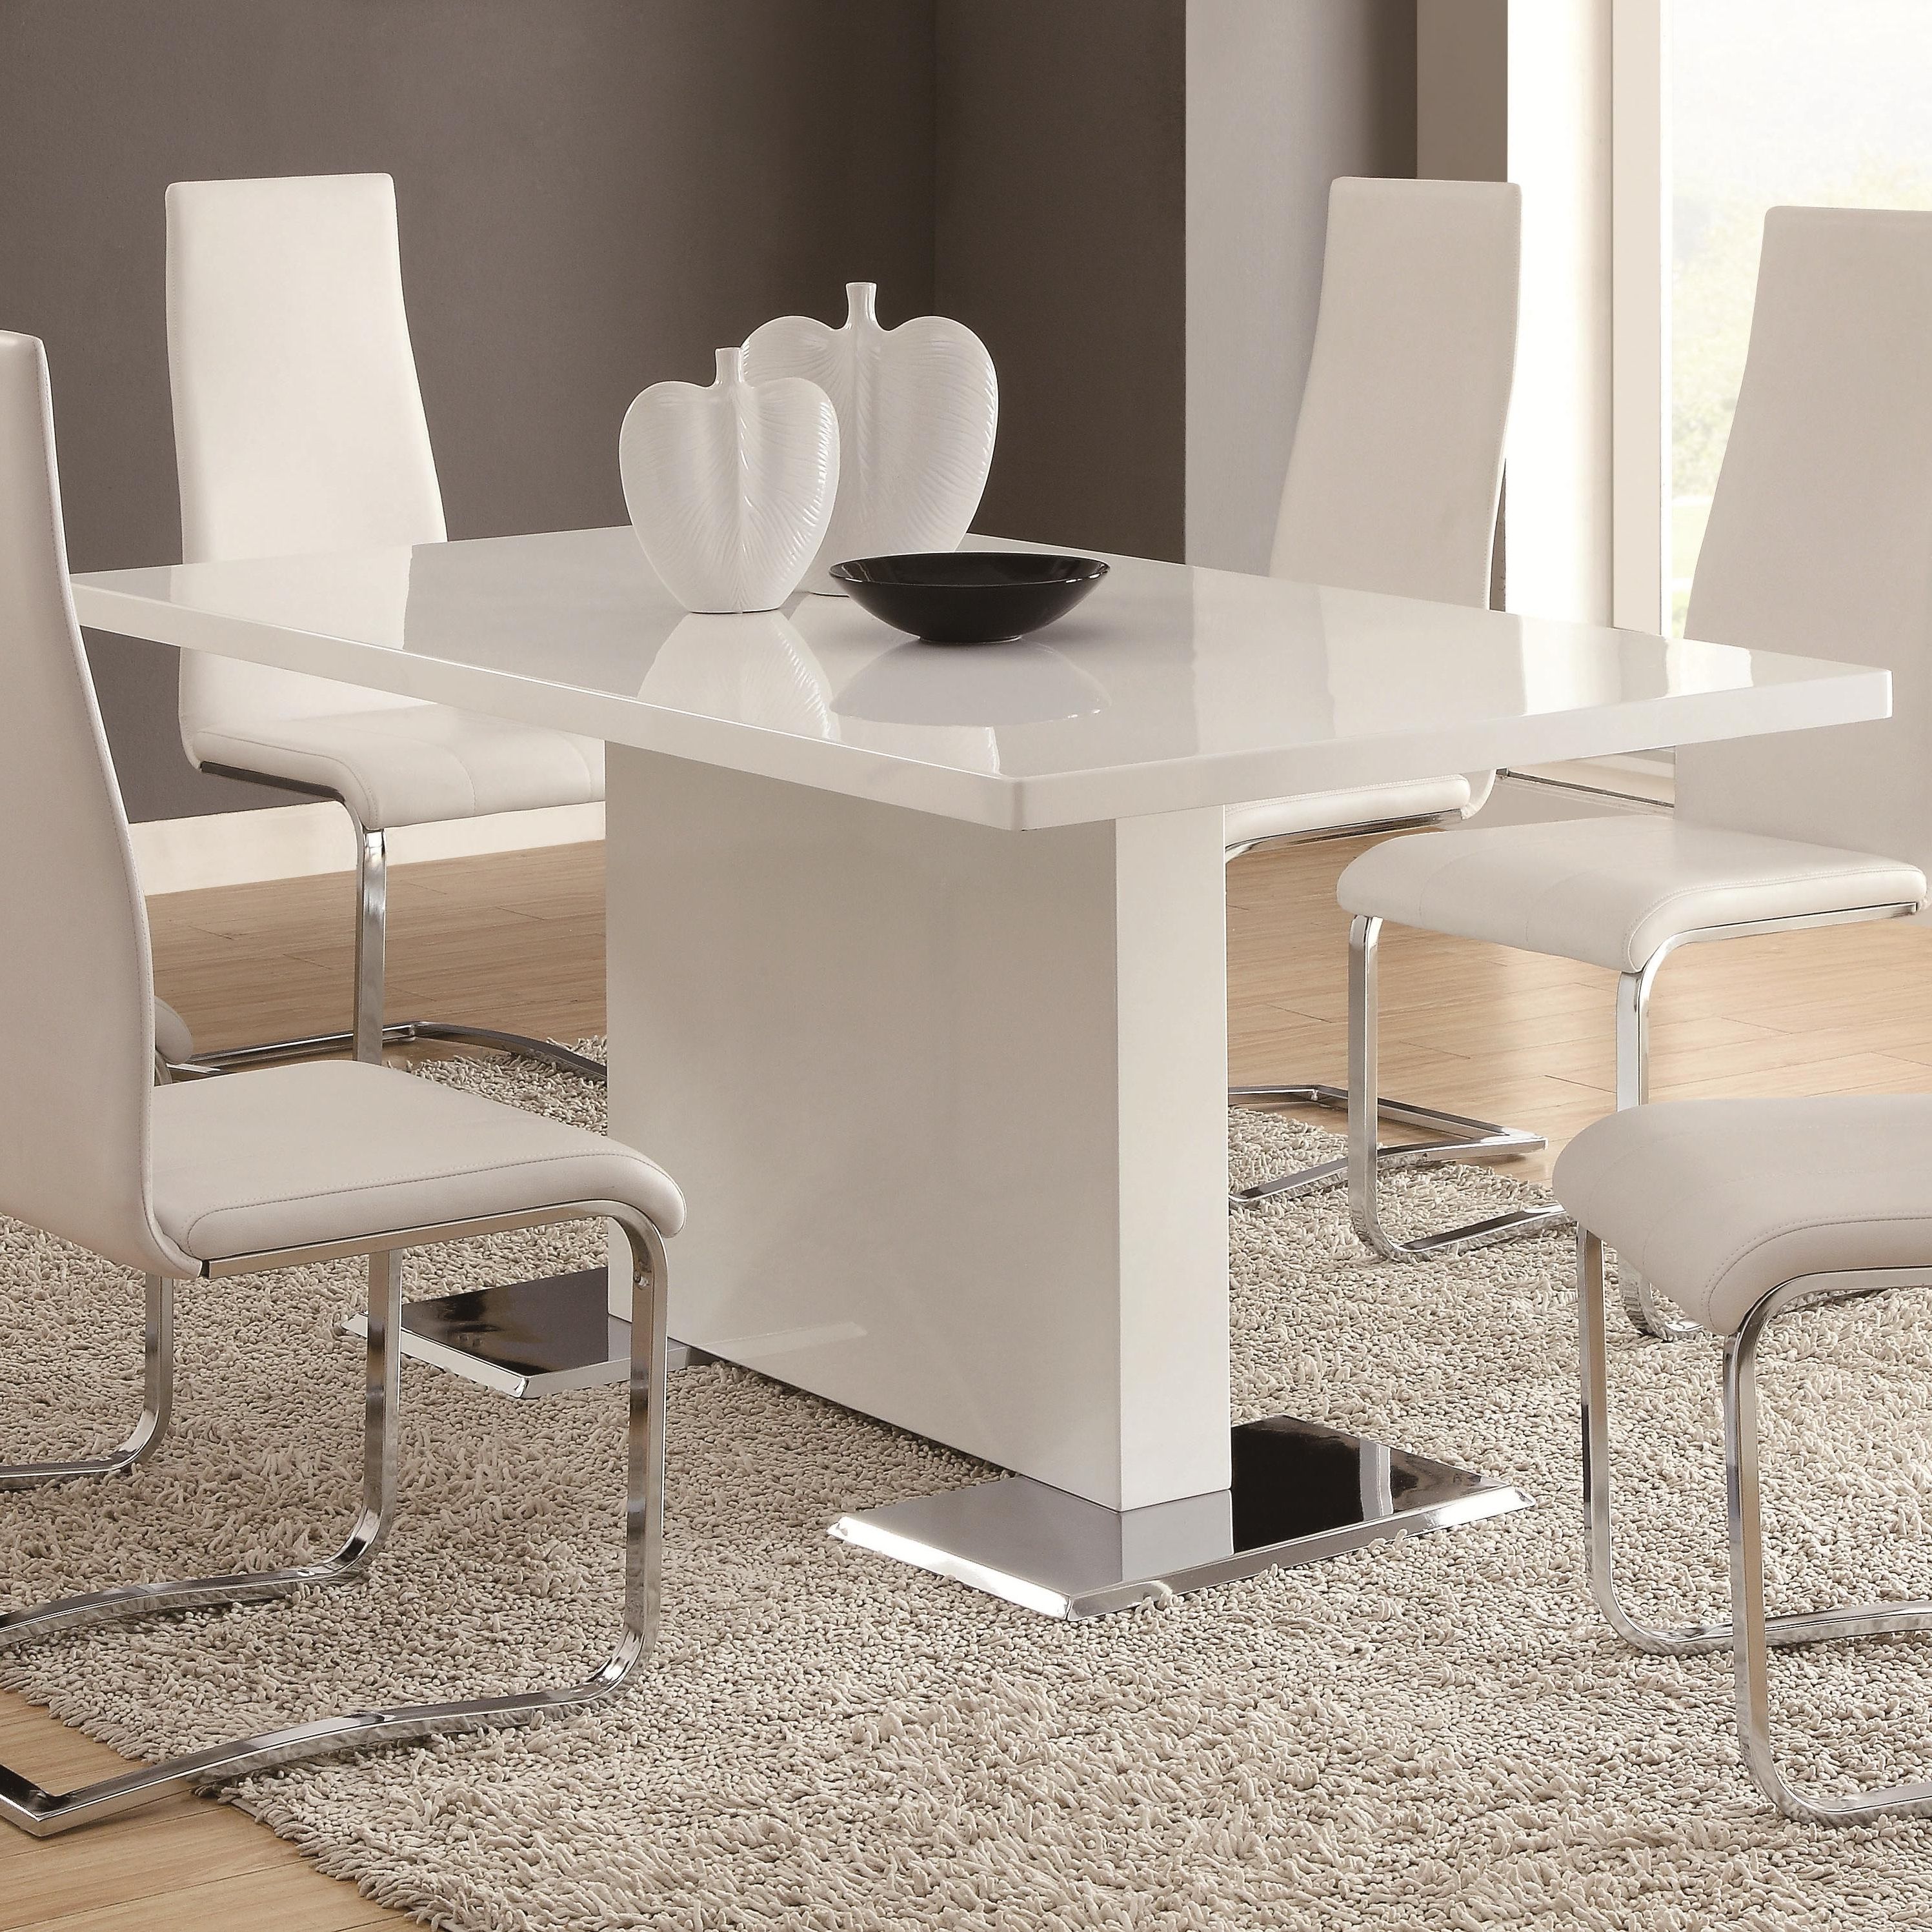 Coaster Modern Dining 102310 White Dining Table With Chrome Metal Pertaining To Latest Chrome Dining Tables (View 16 of 25)